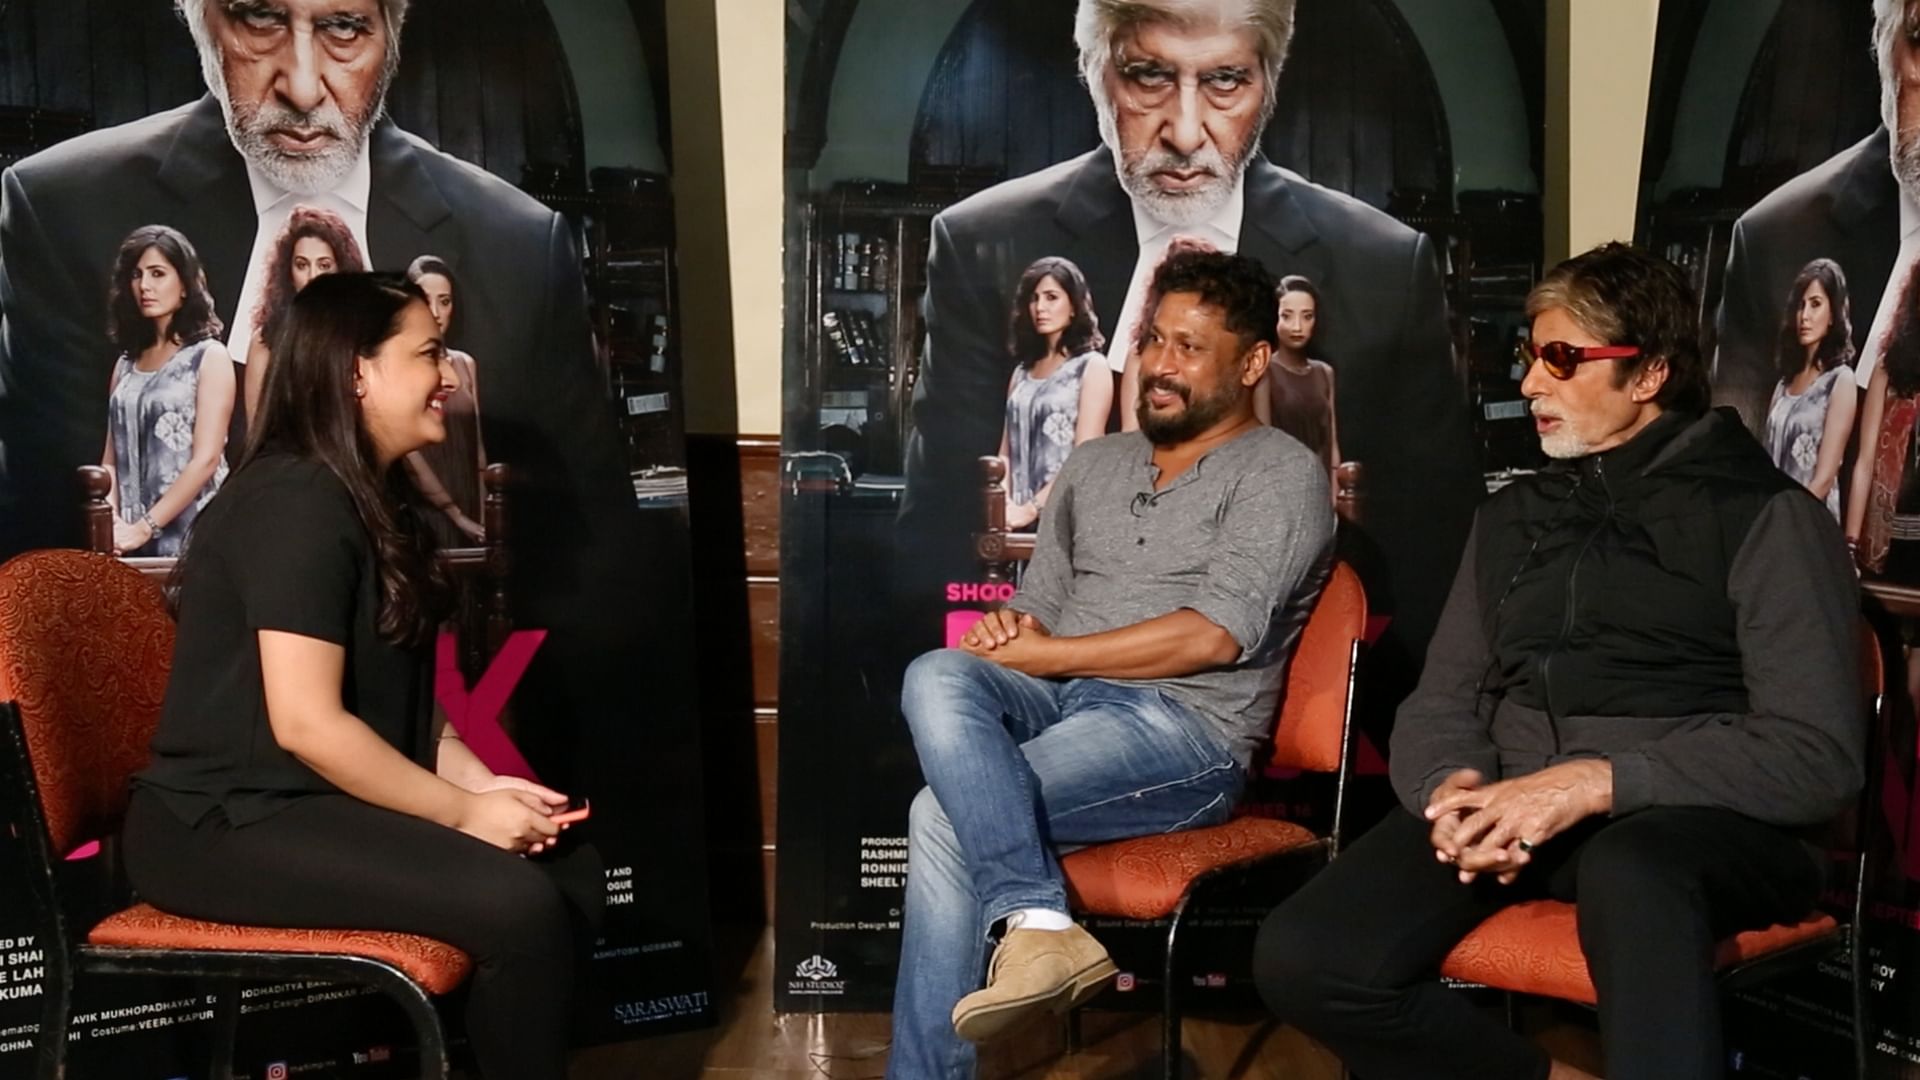 <b>The Quint</b> catches up with Shoojit Sircar and Amitabh Bachchan.